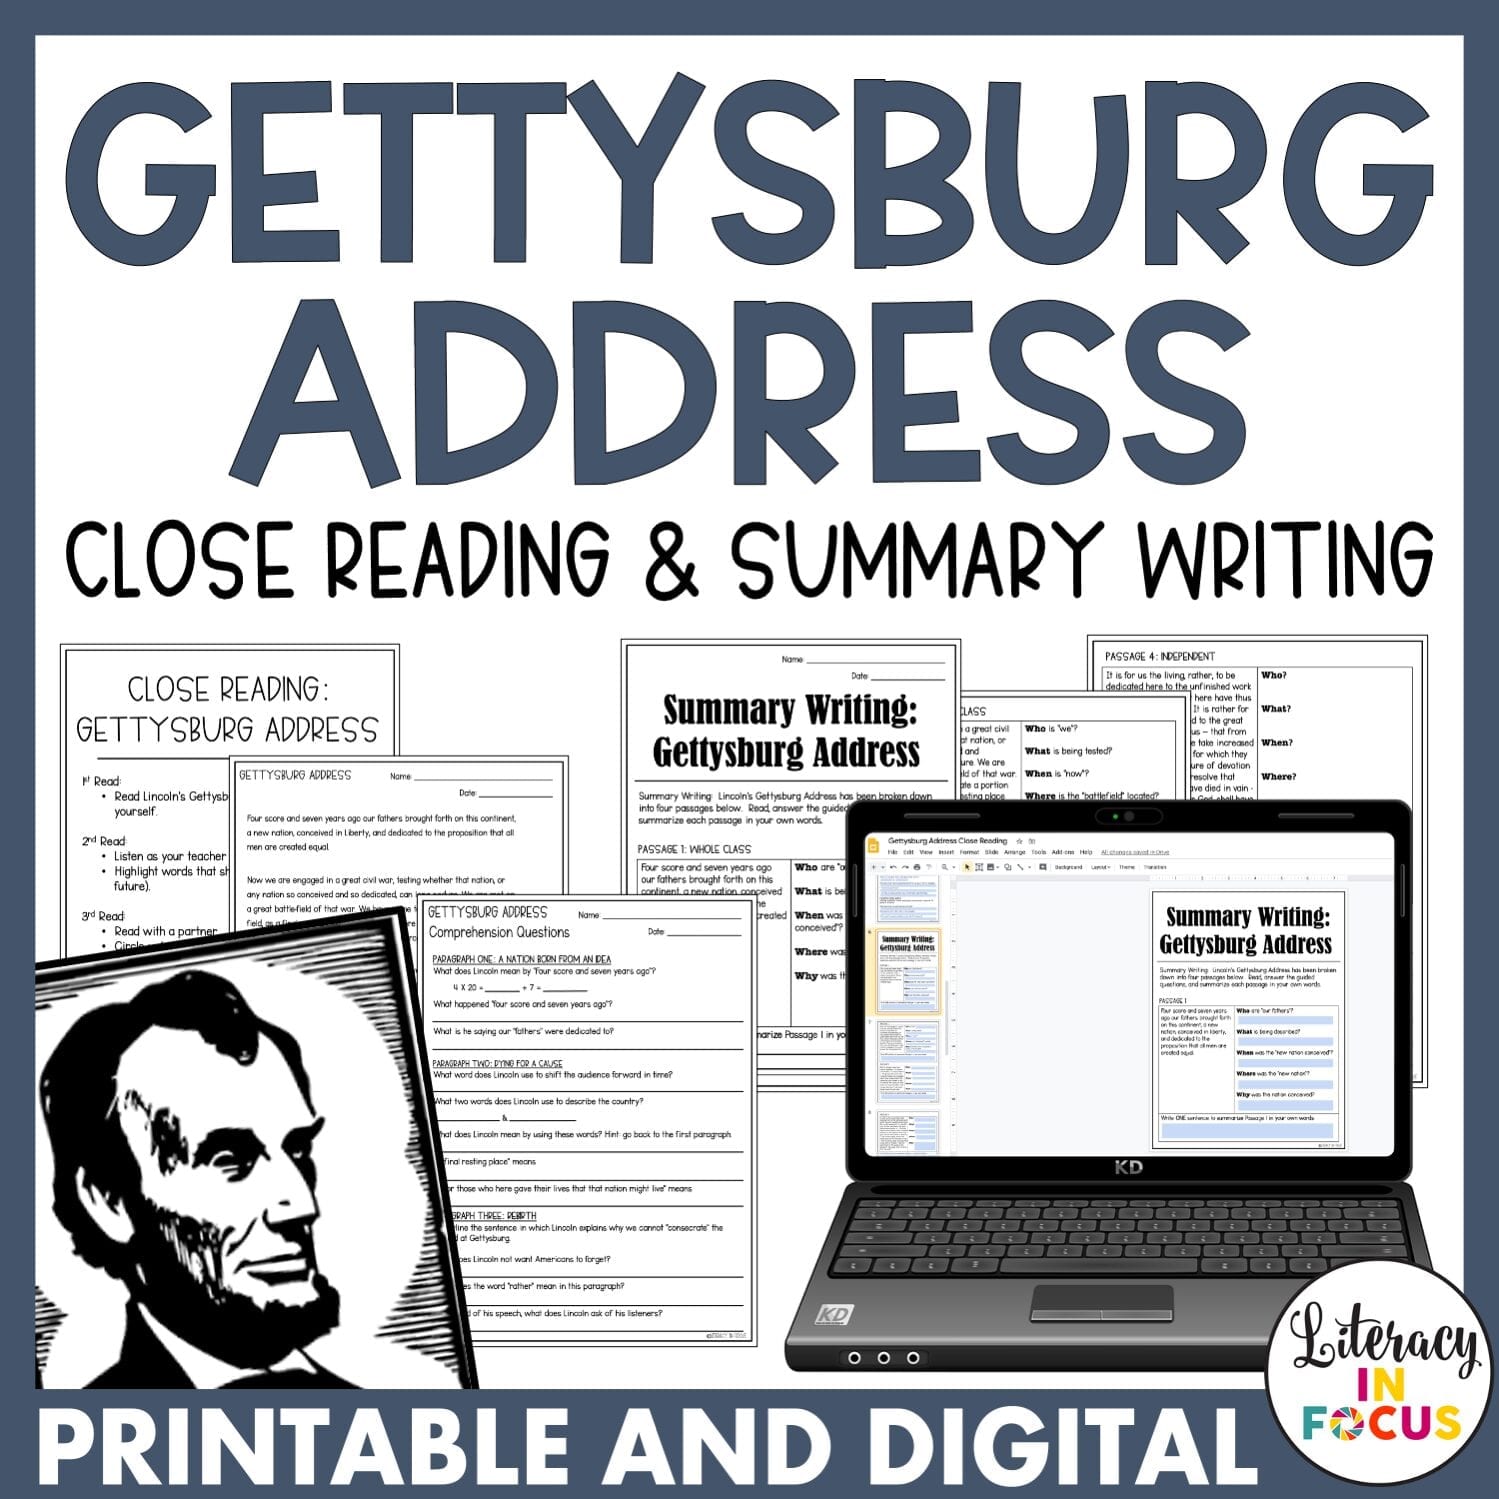 Gettysburg Address Close Reading and Summary Writing Lesson